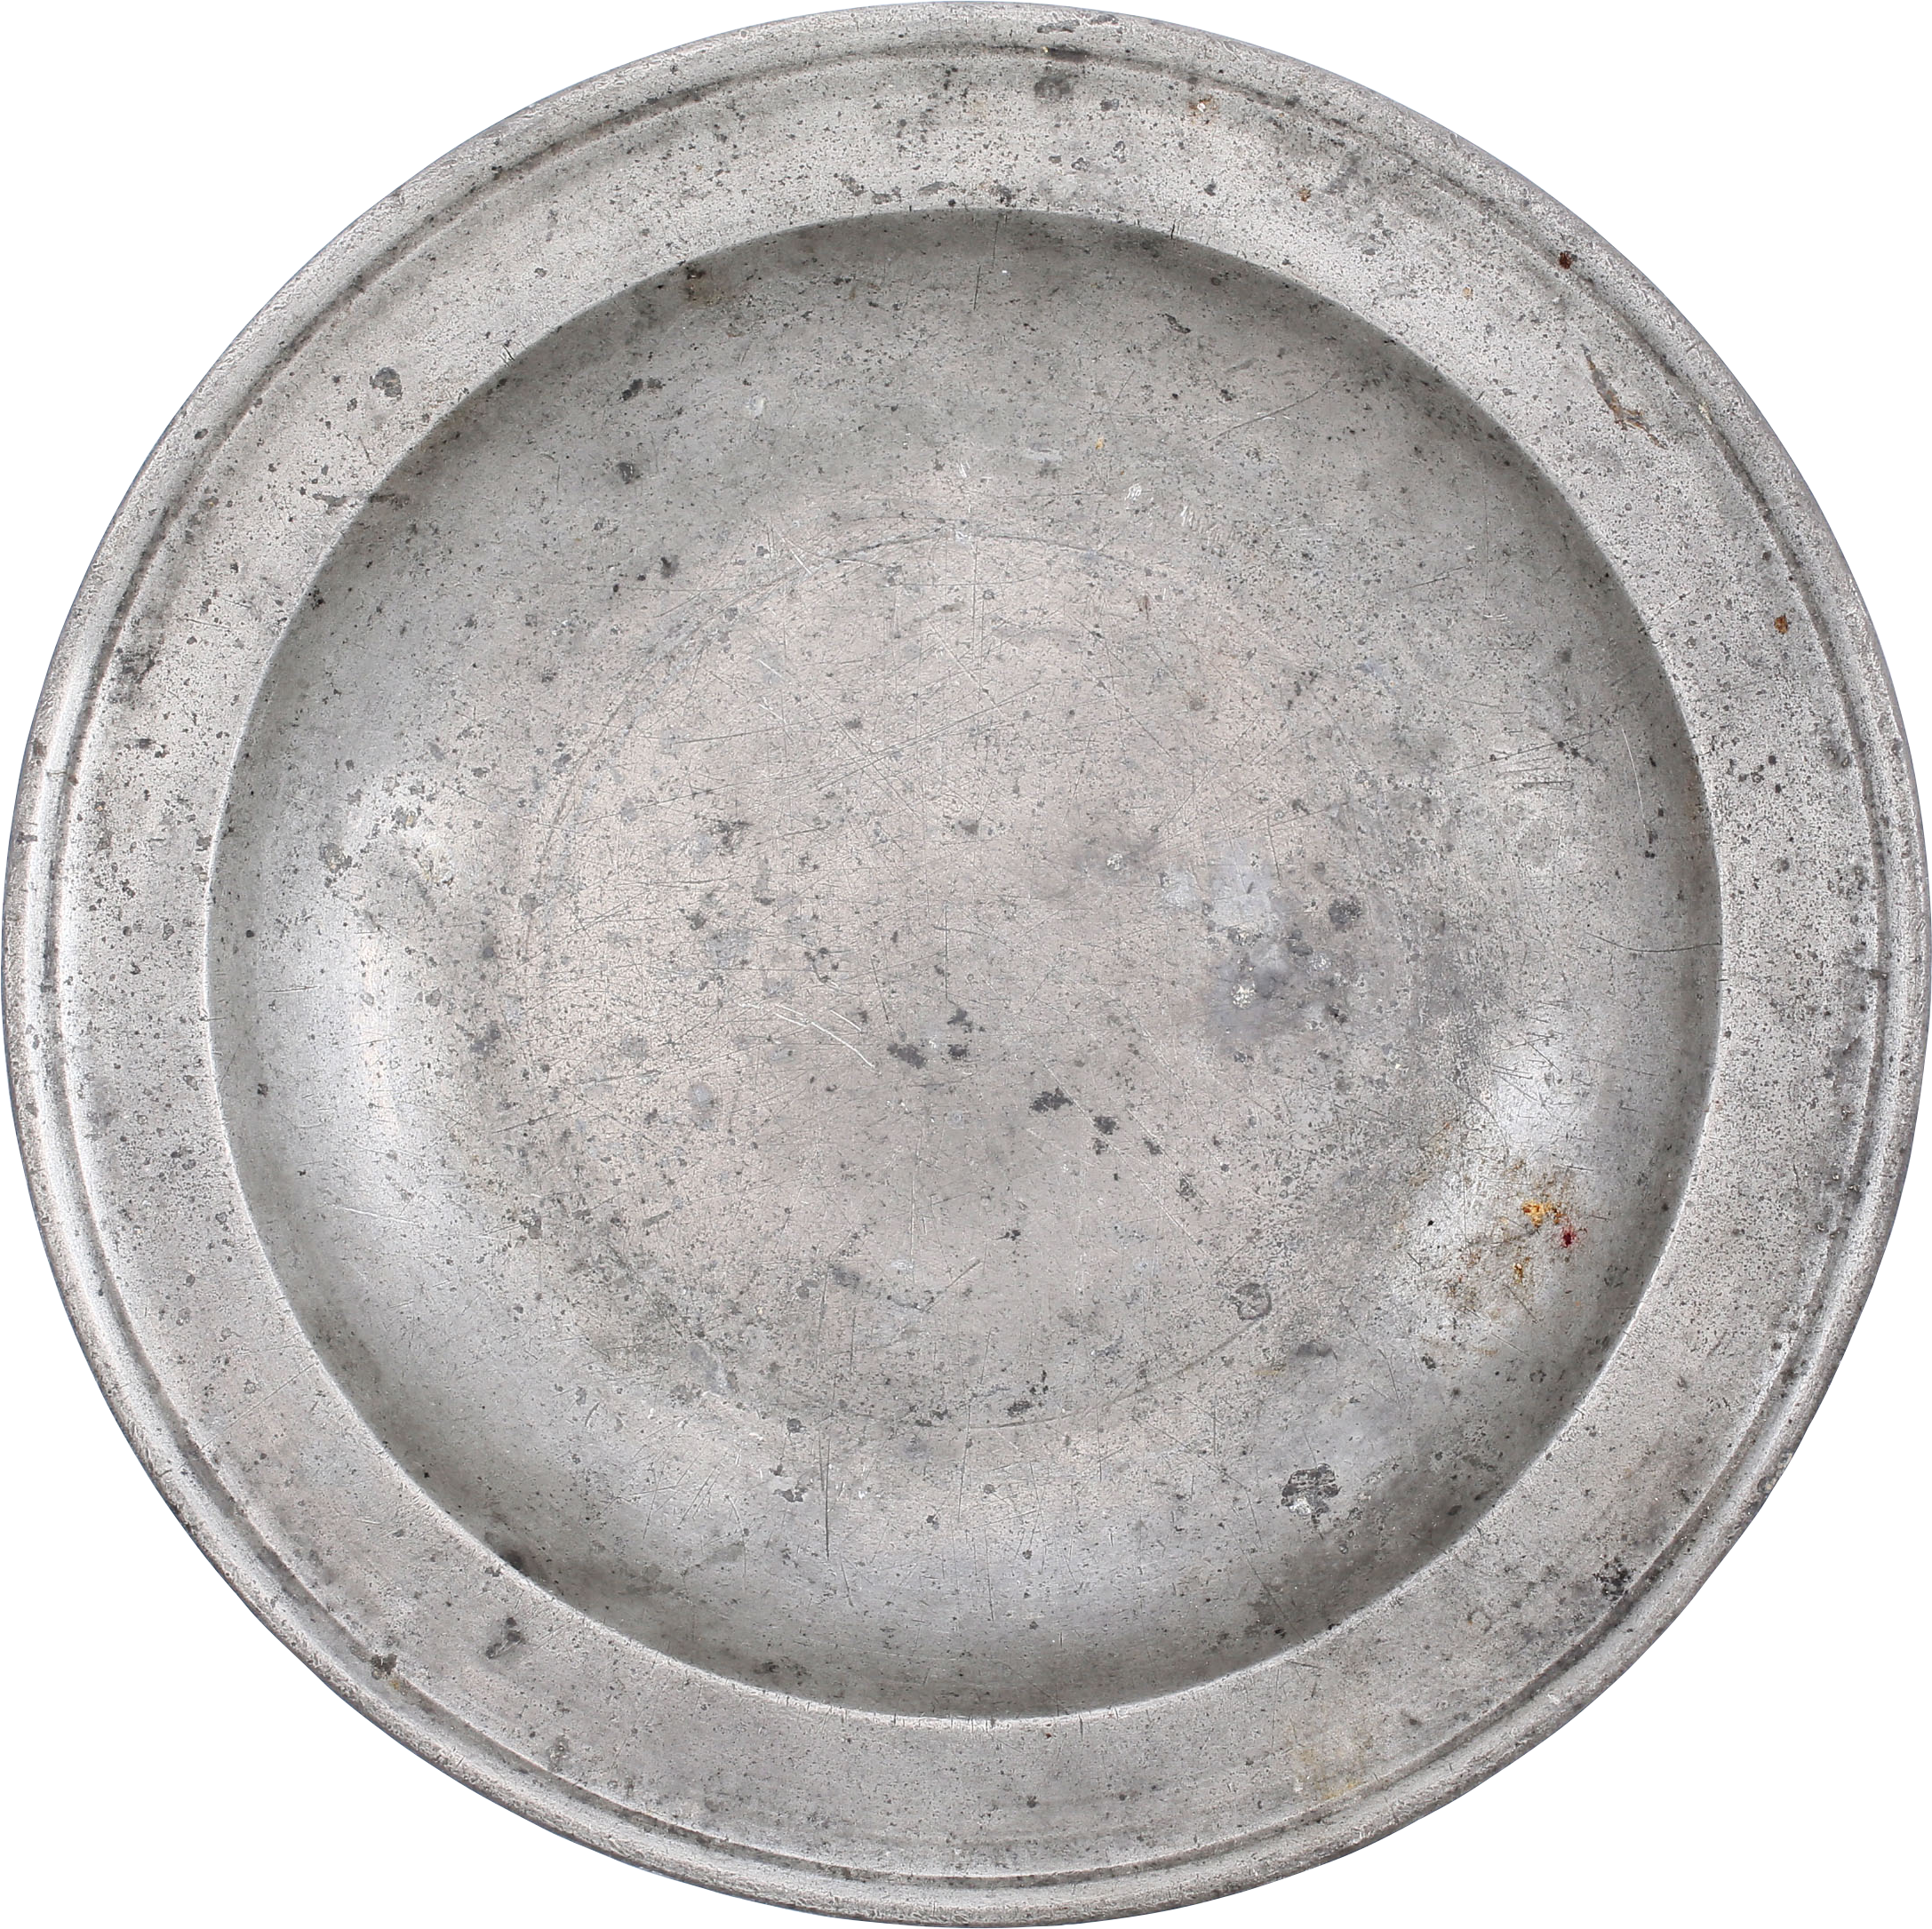 ANTIQUE ENGLISH PEWTER PLATE FROM THE MOVIES! - Fagan Arms